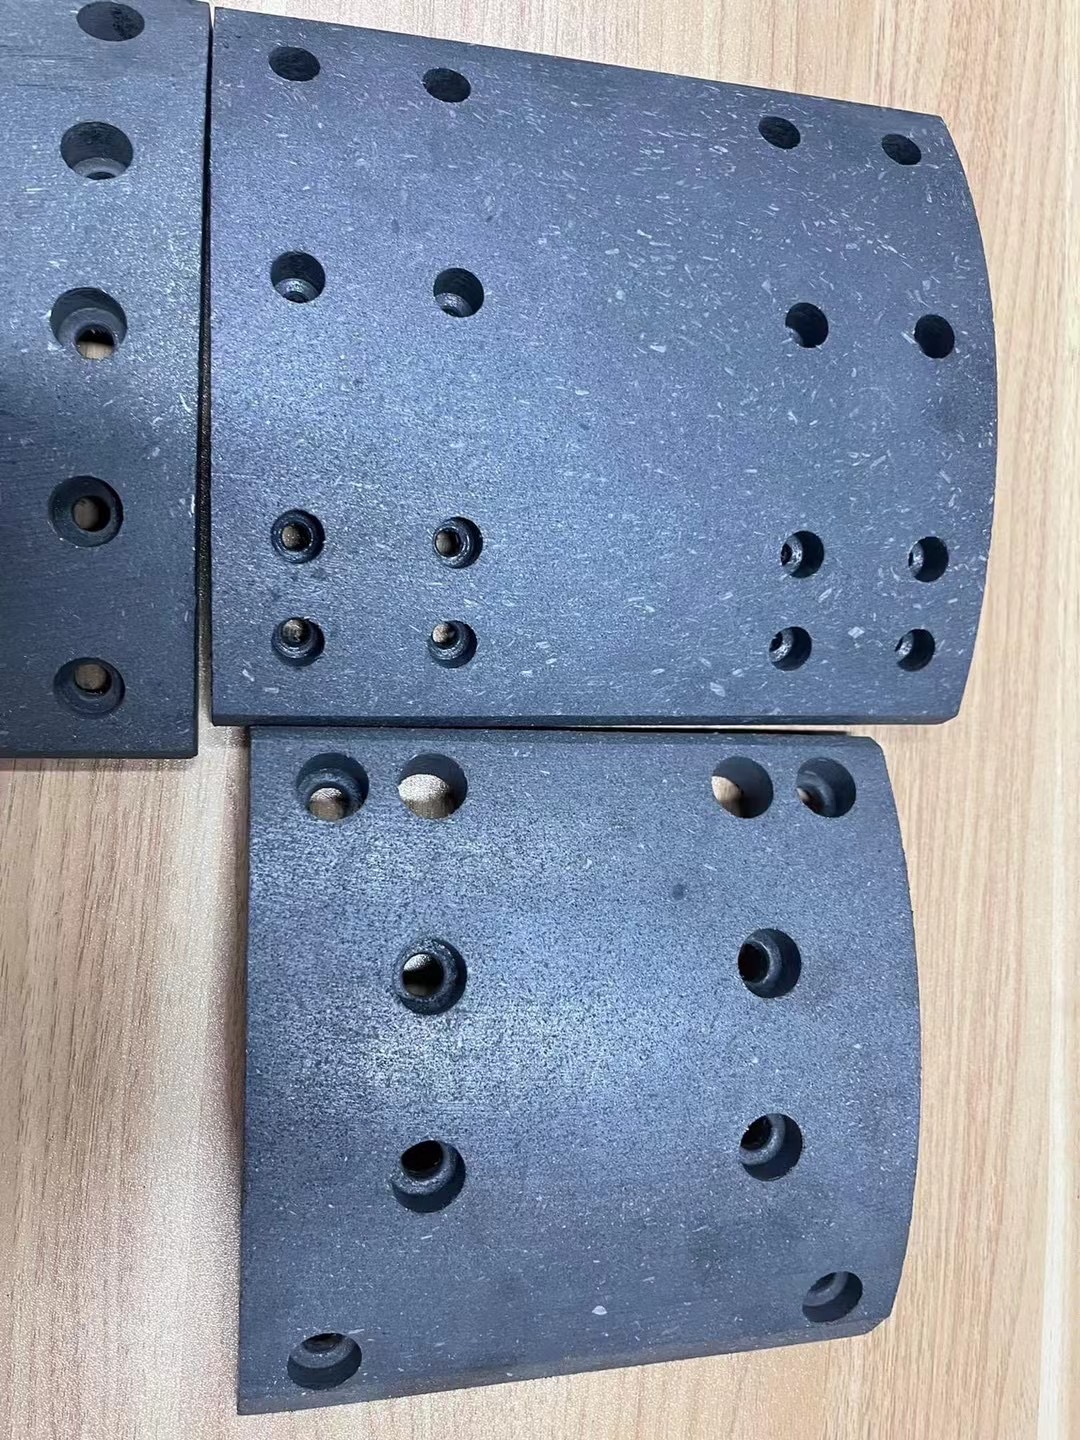 New Production Equipment For Truck Brake Lining